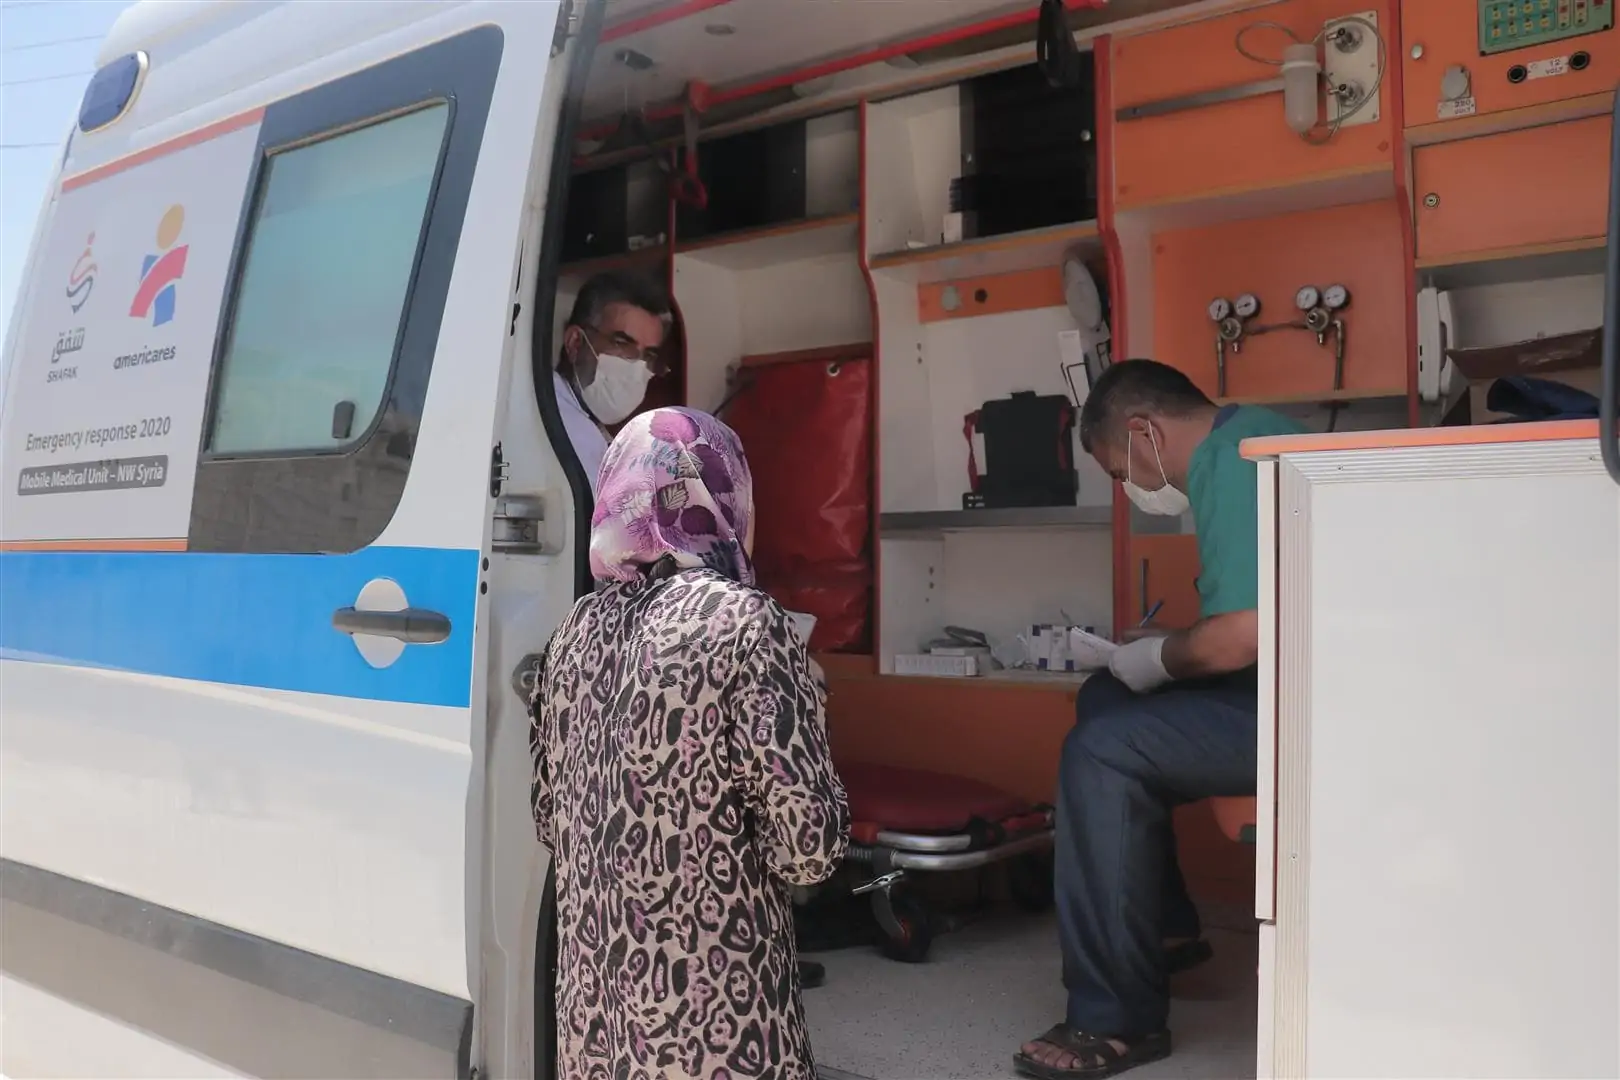 The nurse is writing the patient's information in an ambulance in Syria, July. 05, 2020. (Photo/Shafak)